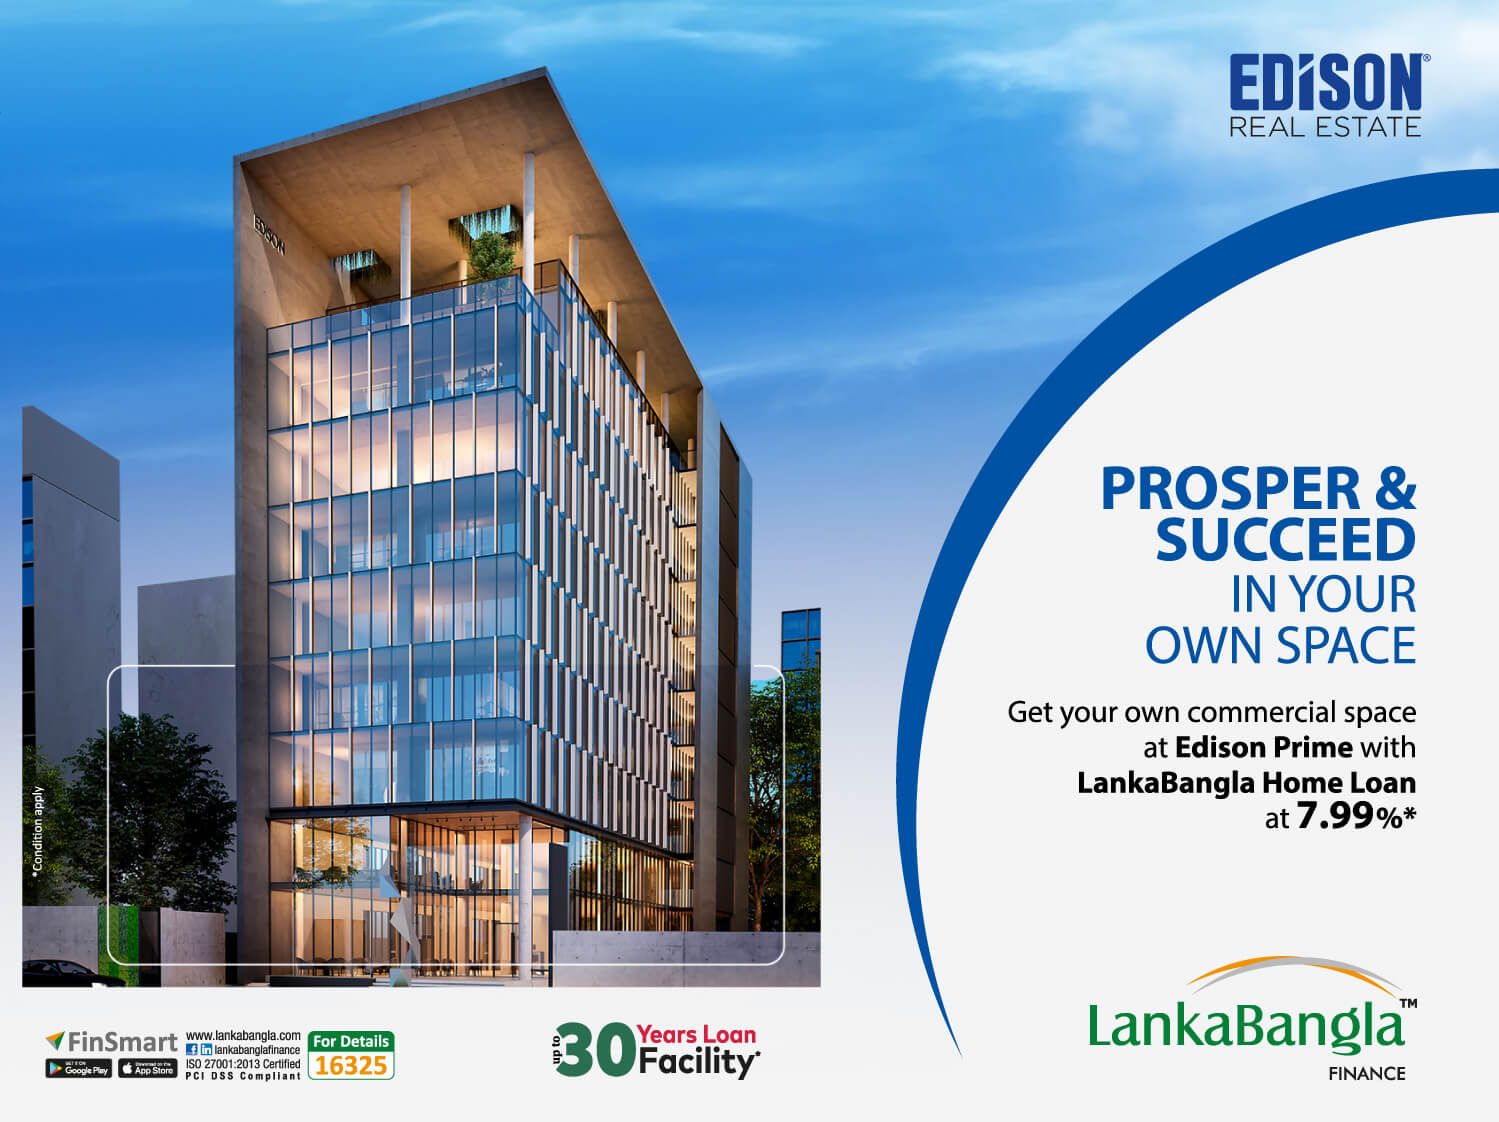 Get your own commercial space at Edison Prime with LBFL Home Loan